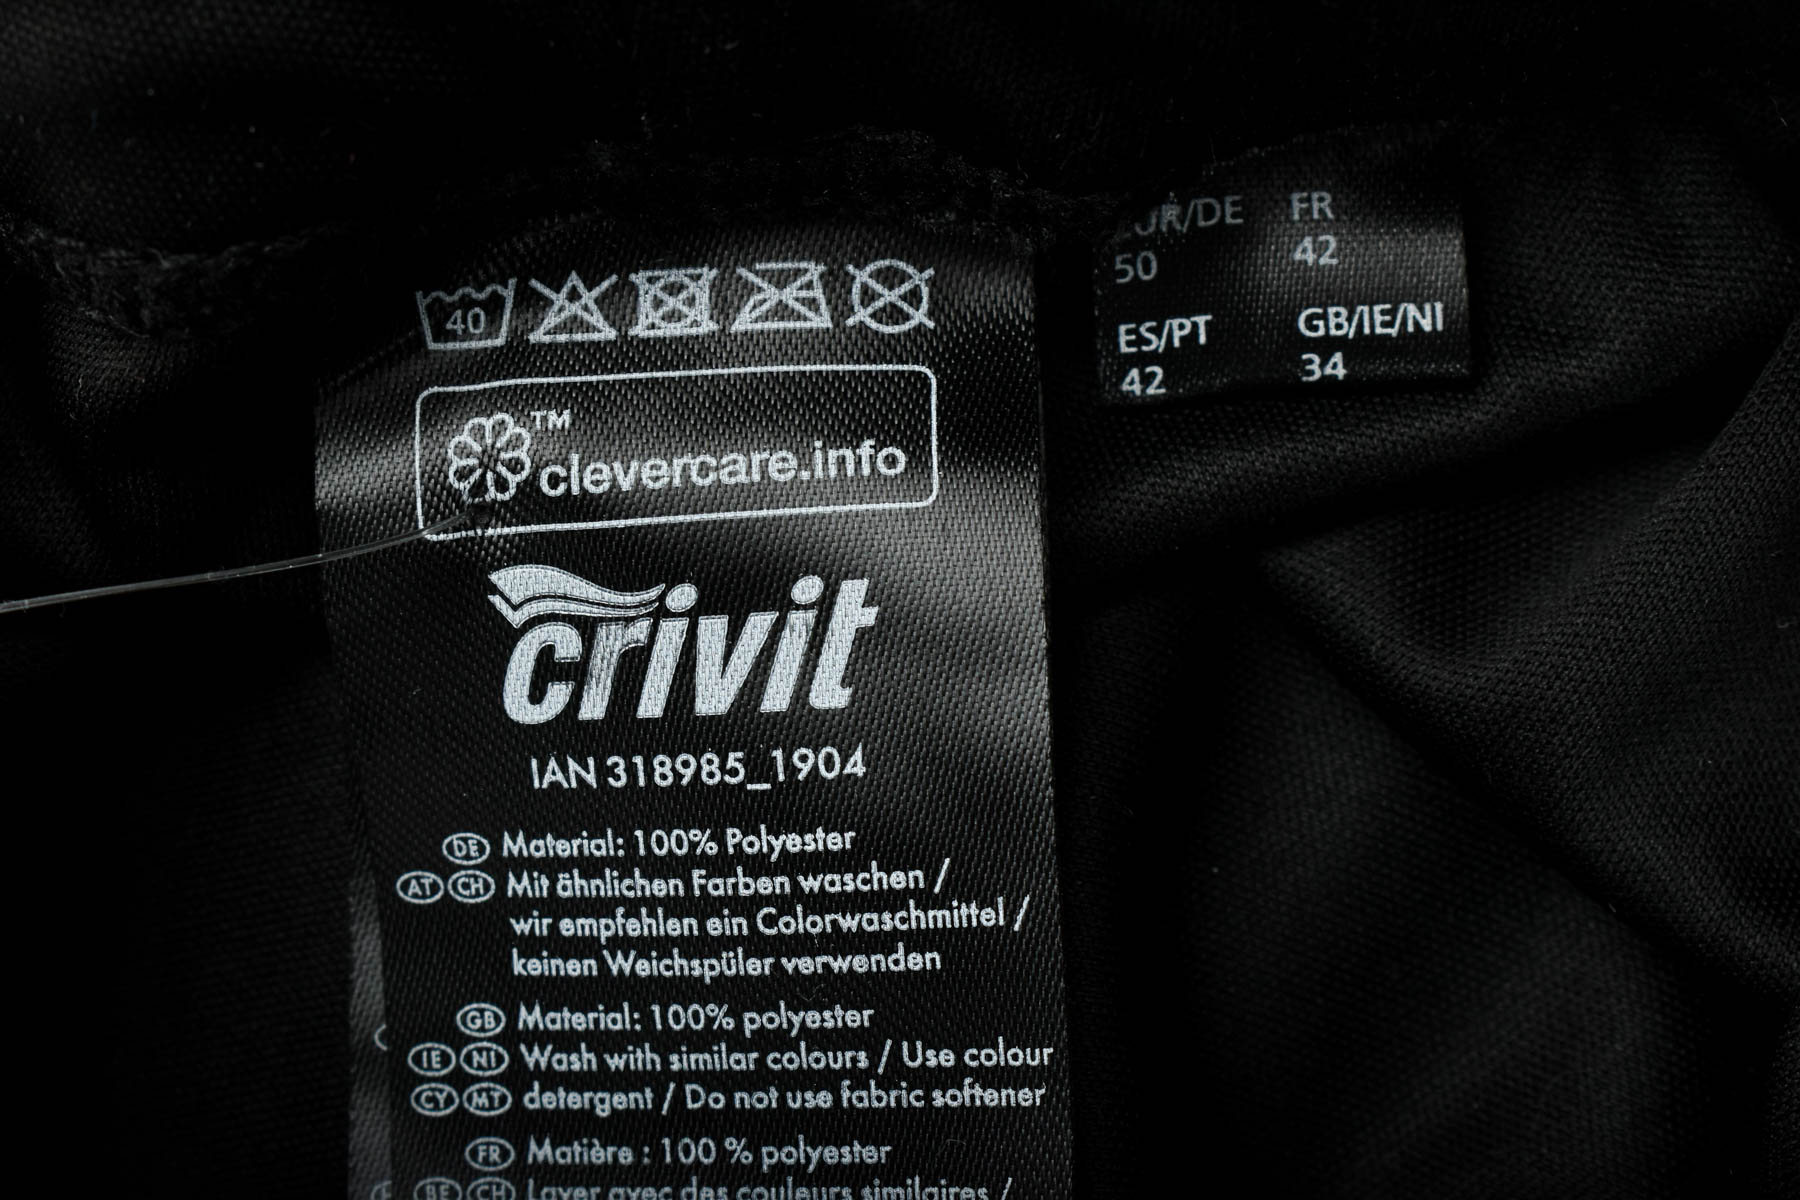 Men's shorts for cycling - Crivit - 2